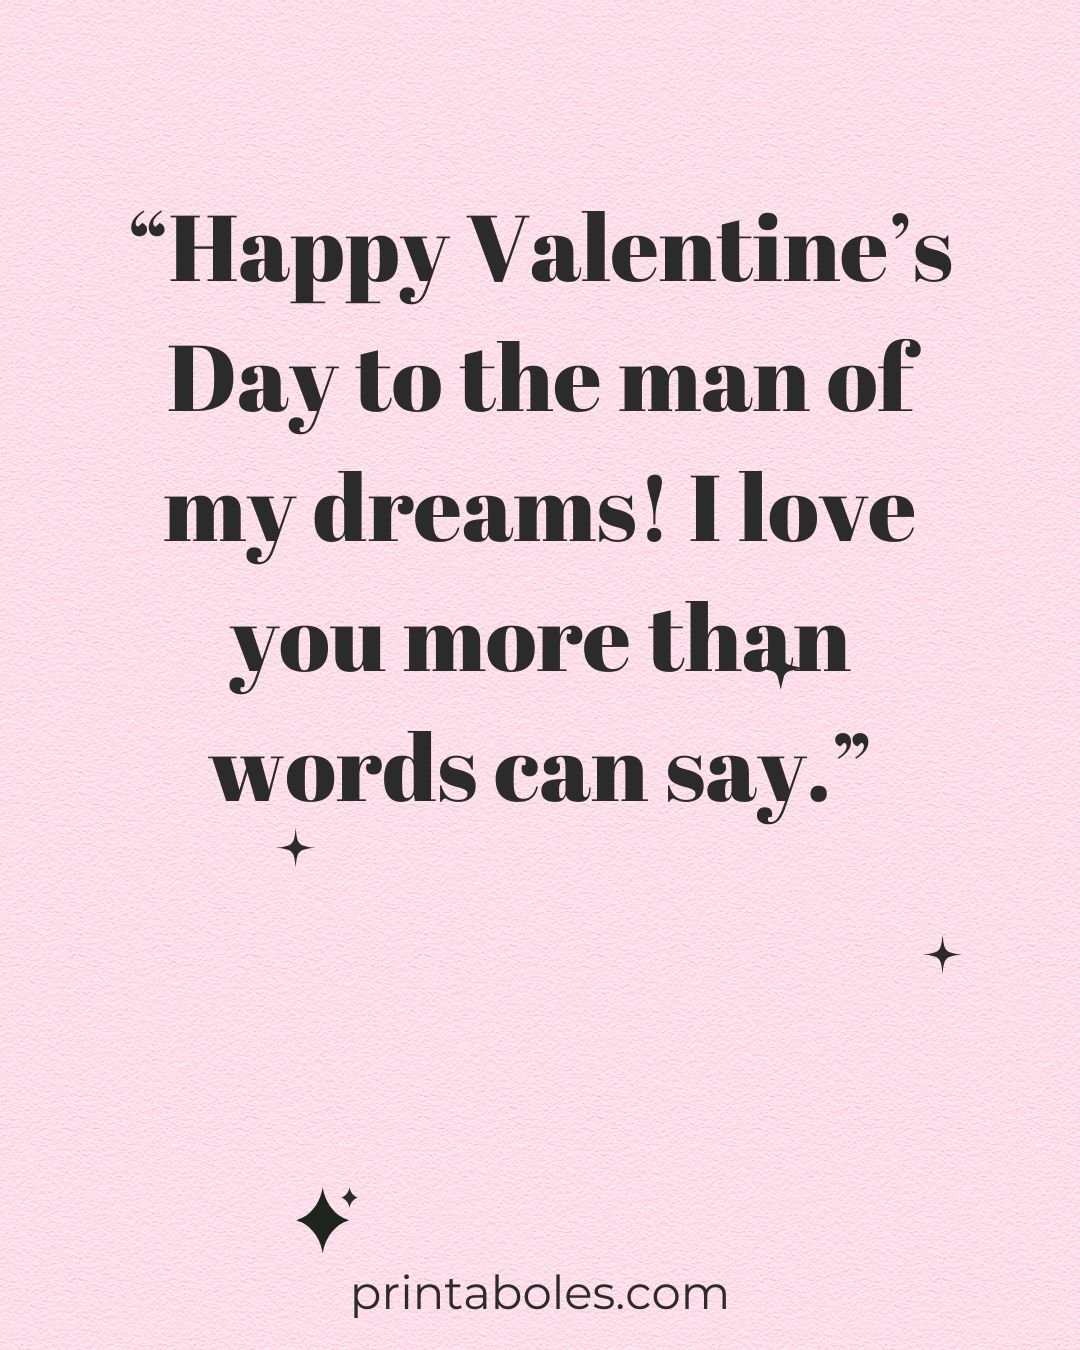 40 Printable Quotes to Show Appreciation to Your Amazing Husband ...